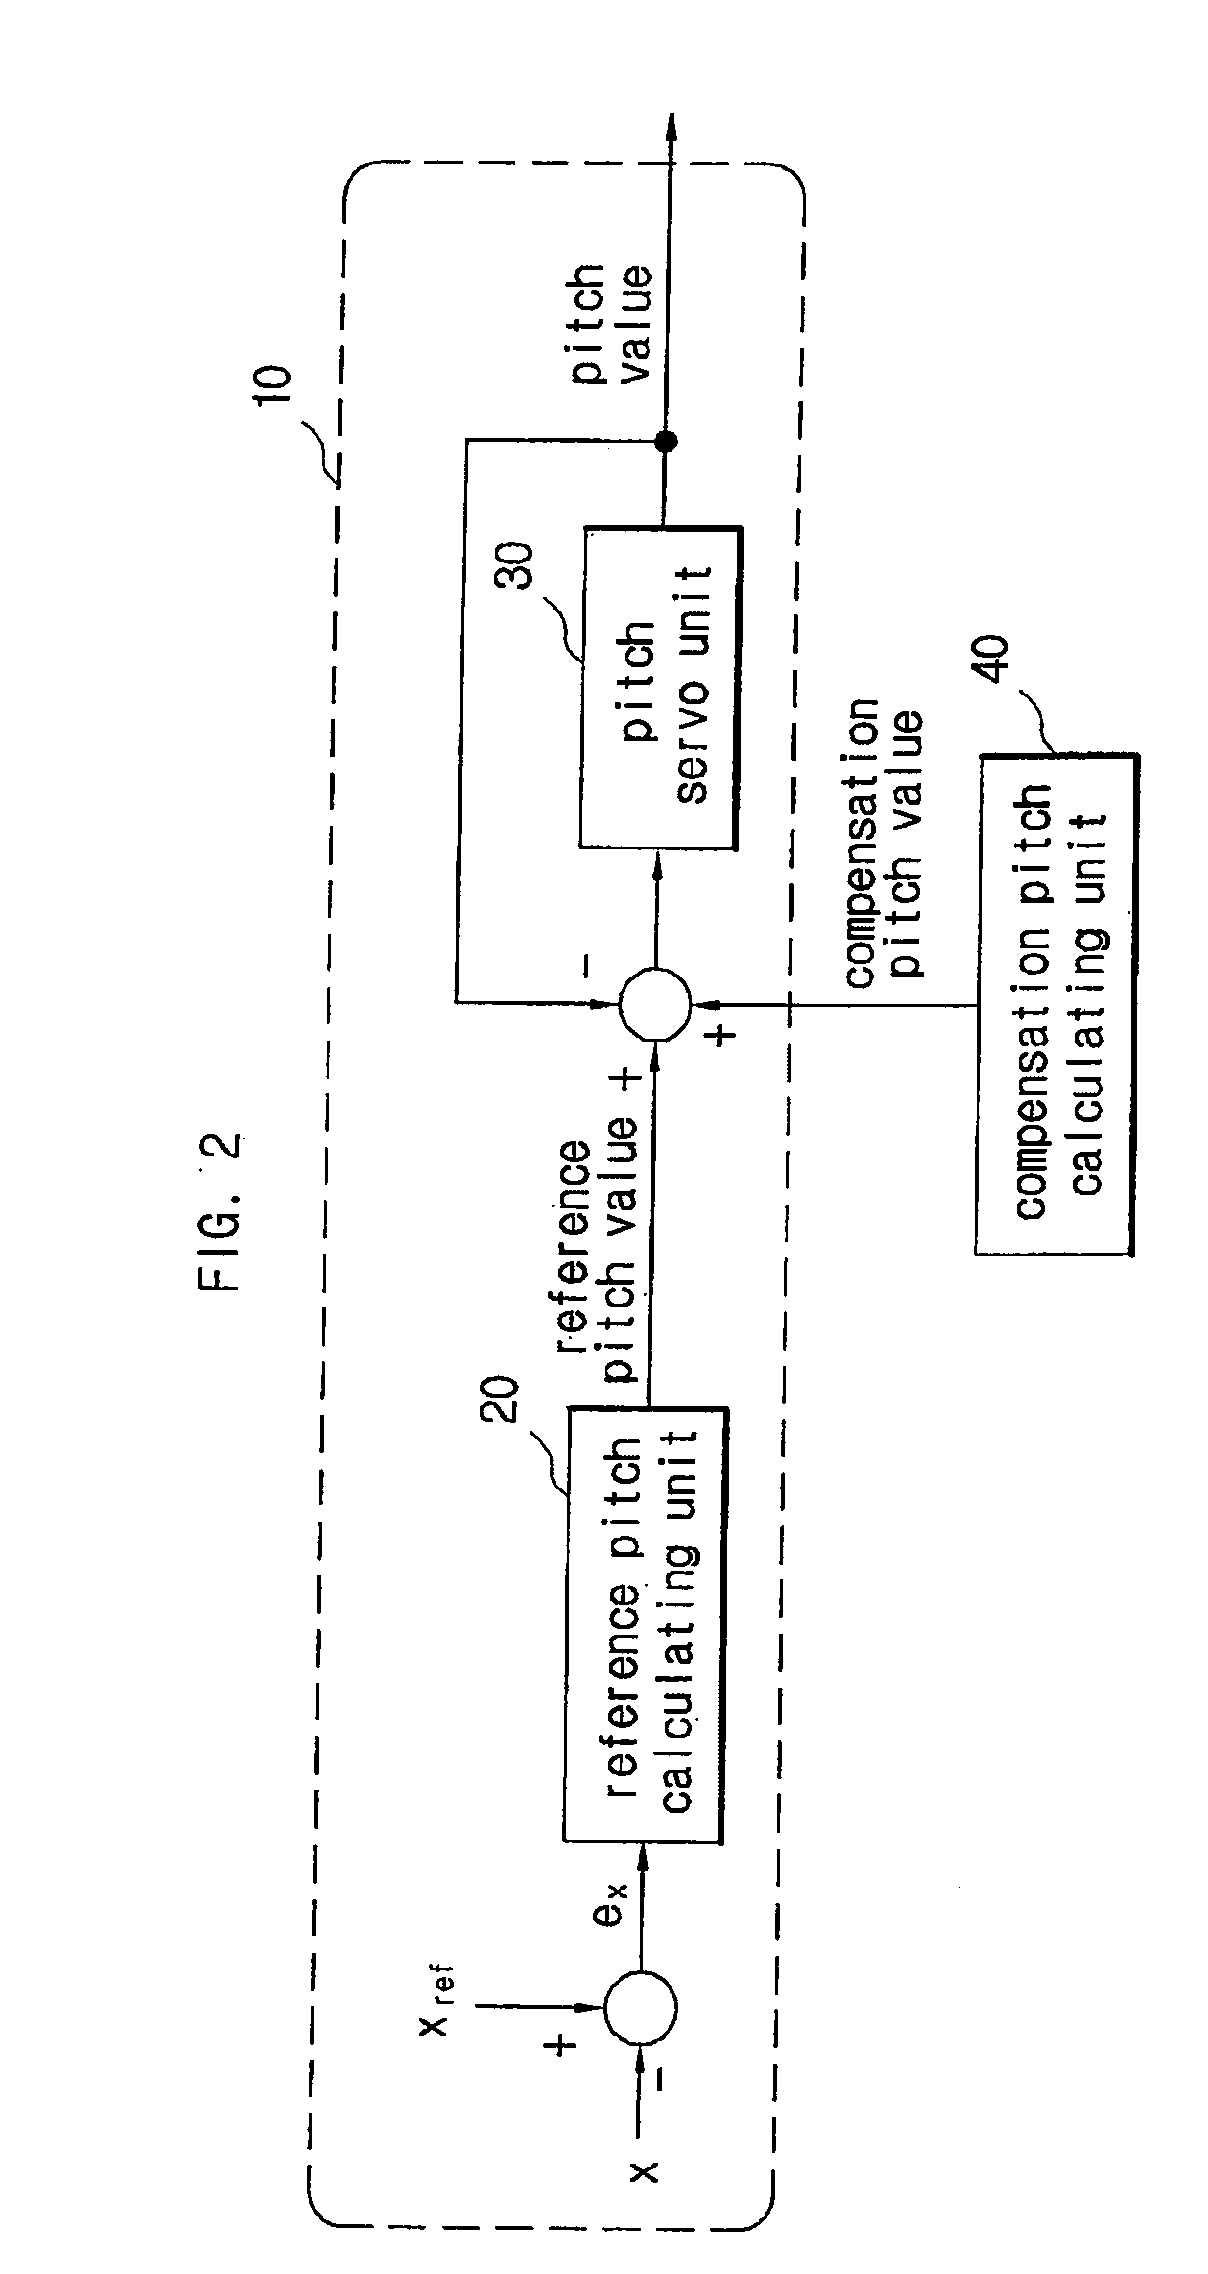 Apparatus and system for pitch angle control of wind turbine